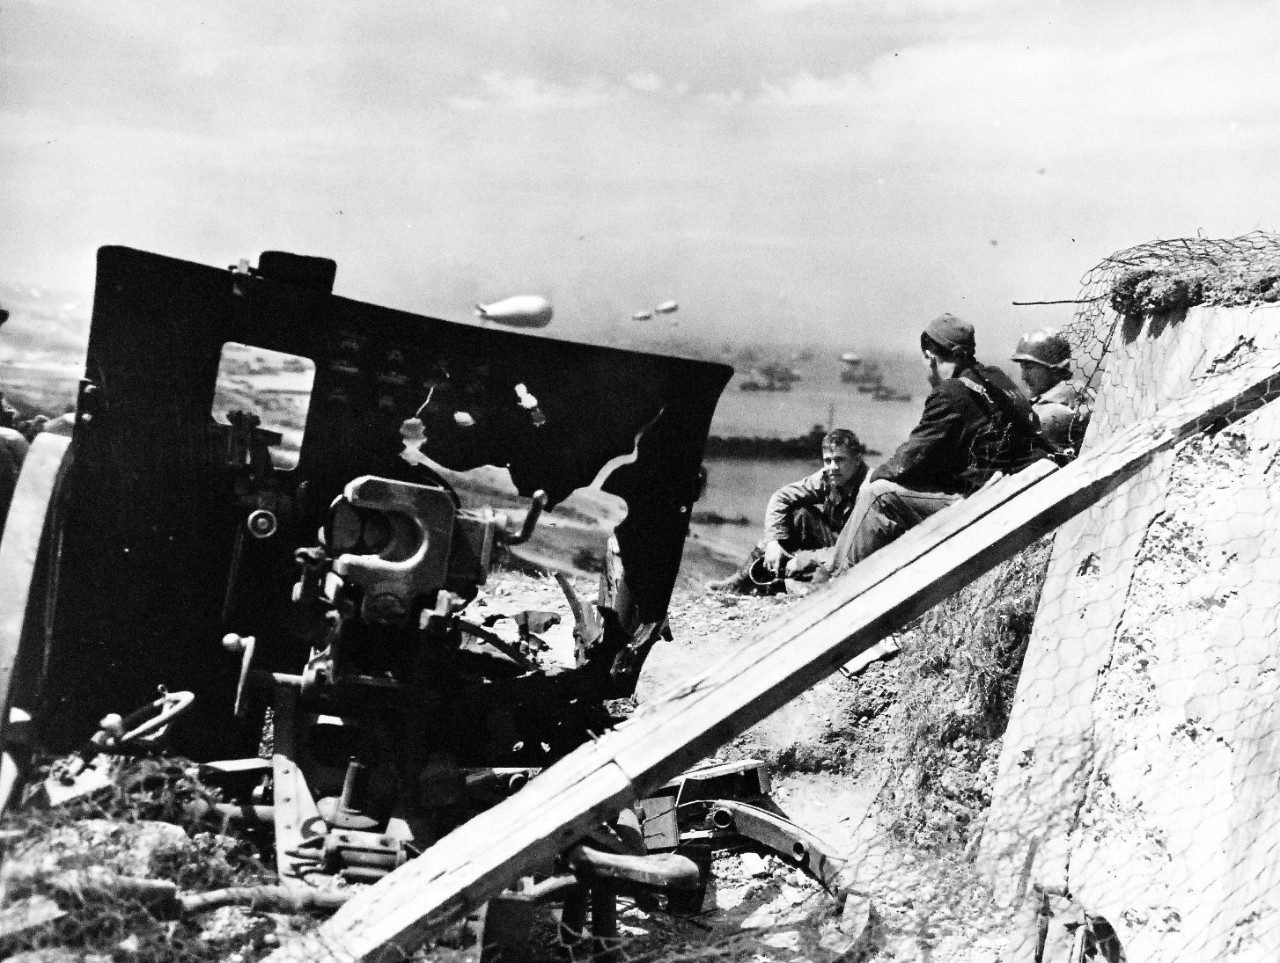 80-G-285217:  Normandy Invasion, June 1944. A German gun position on beach of Normandy, France, destroyed by Naval gunfire.  In background are Allied ships.  Photograph released November 7, 1944.  U.S. Navy photograph, now in the collections of the National Archives.  (2016/03/15).